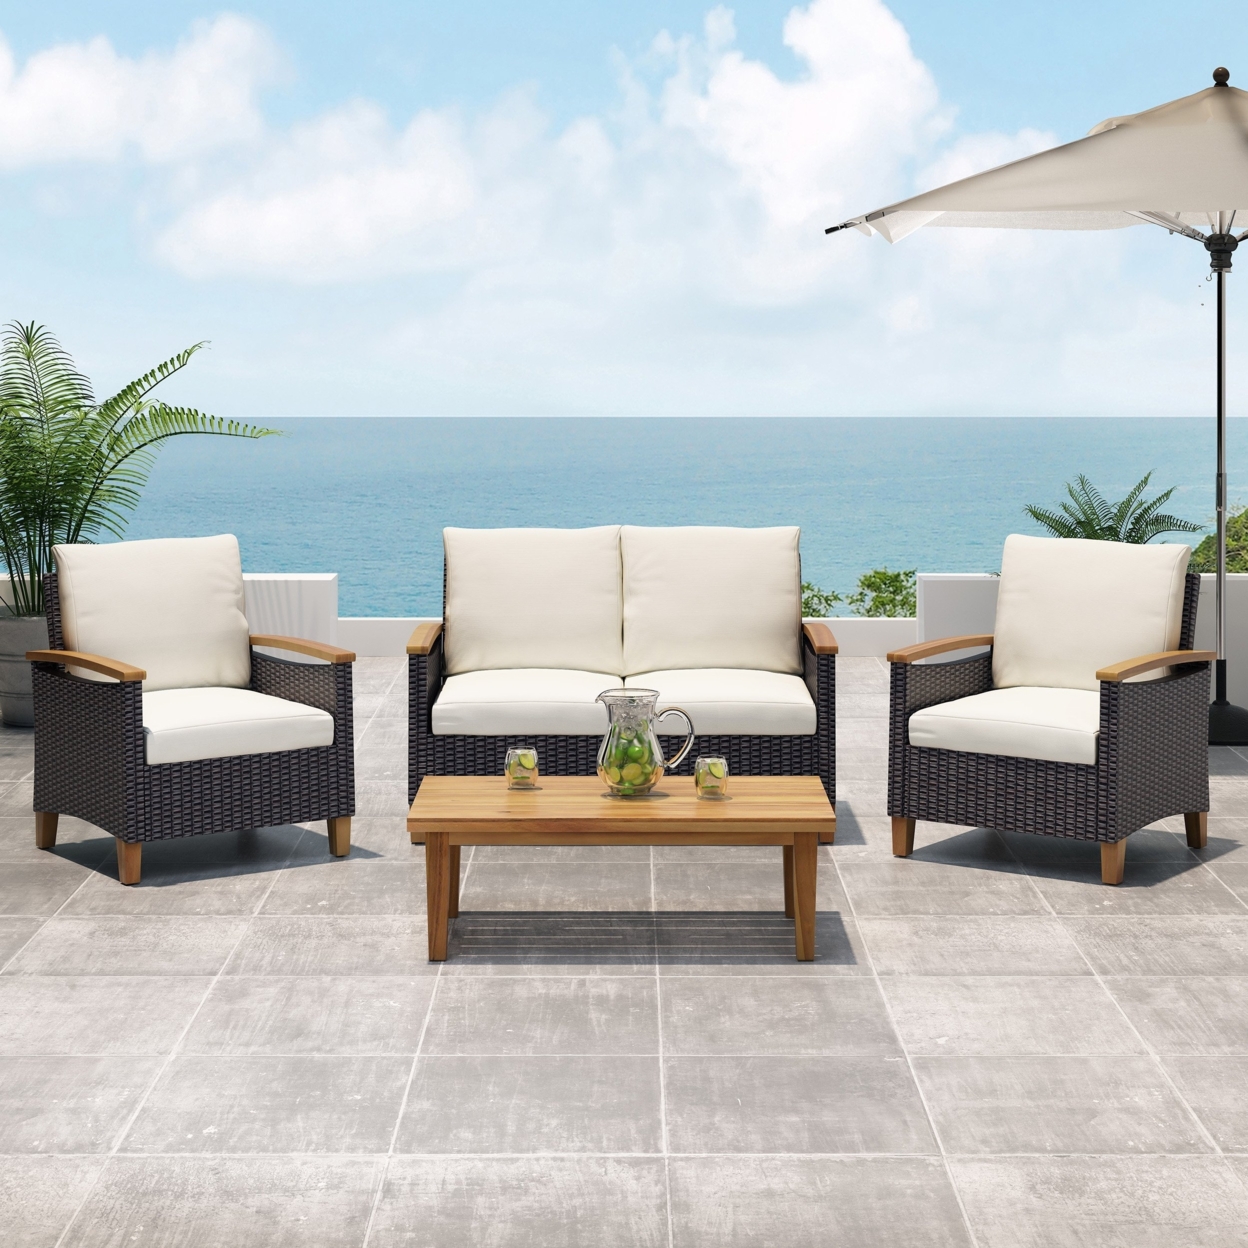 Velthur Outdoor 4 Seater Chat Set With Coffee Table - Multi-brown/beige/teak